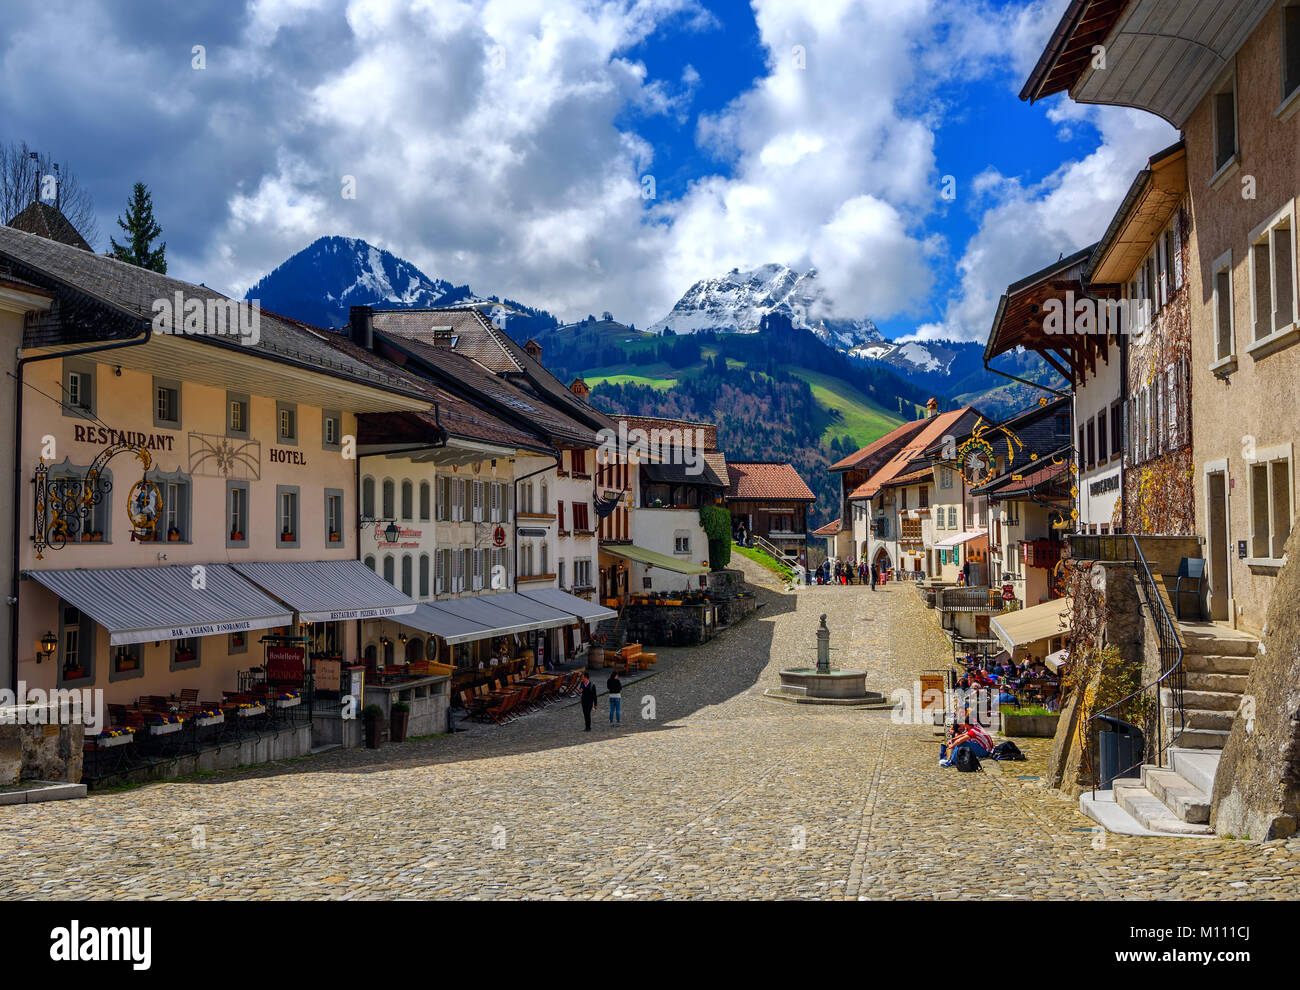 Gruyeres, Switzerland - April 14: The medieval Old Town of Gruyeres is an important tourist location and is name giving to the famous swiss Gruyere ch Stock Photo